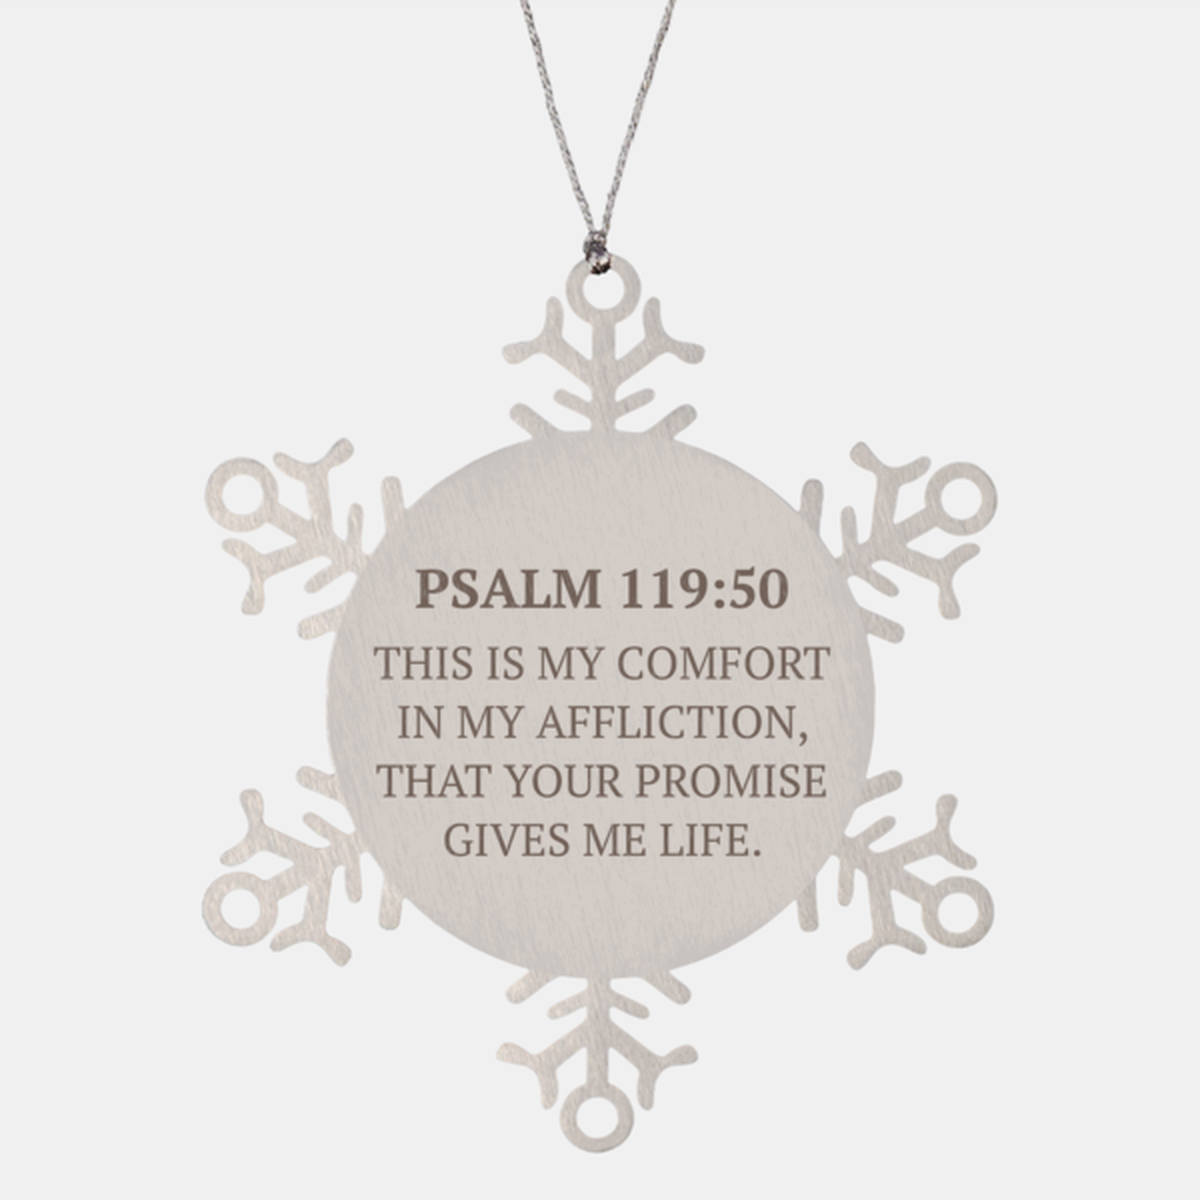 Christian Ornaments For Christmas Tree, This Is My Comfort In My Affliction, Religious Christmas Decorations, Scripture Ornaments Gifts, Bible Verse Ornament